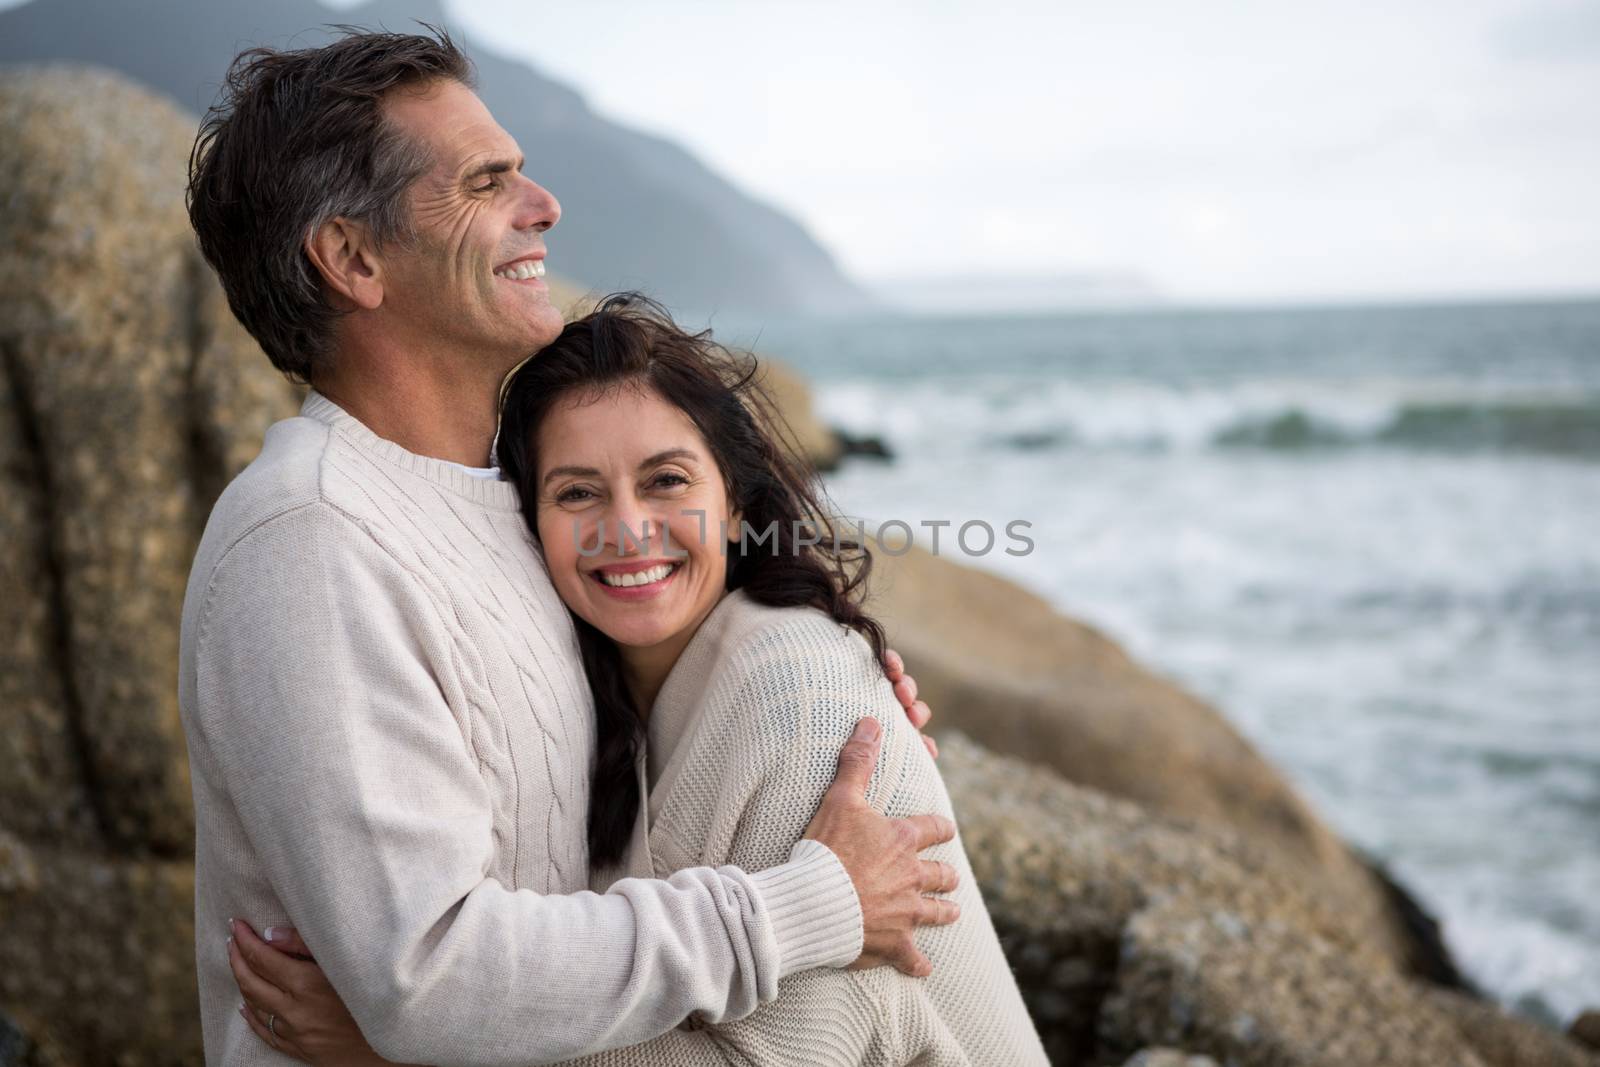 Romantic couple embracing each other on beach during winter